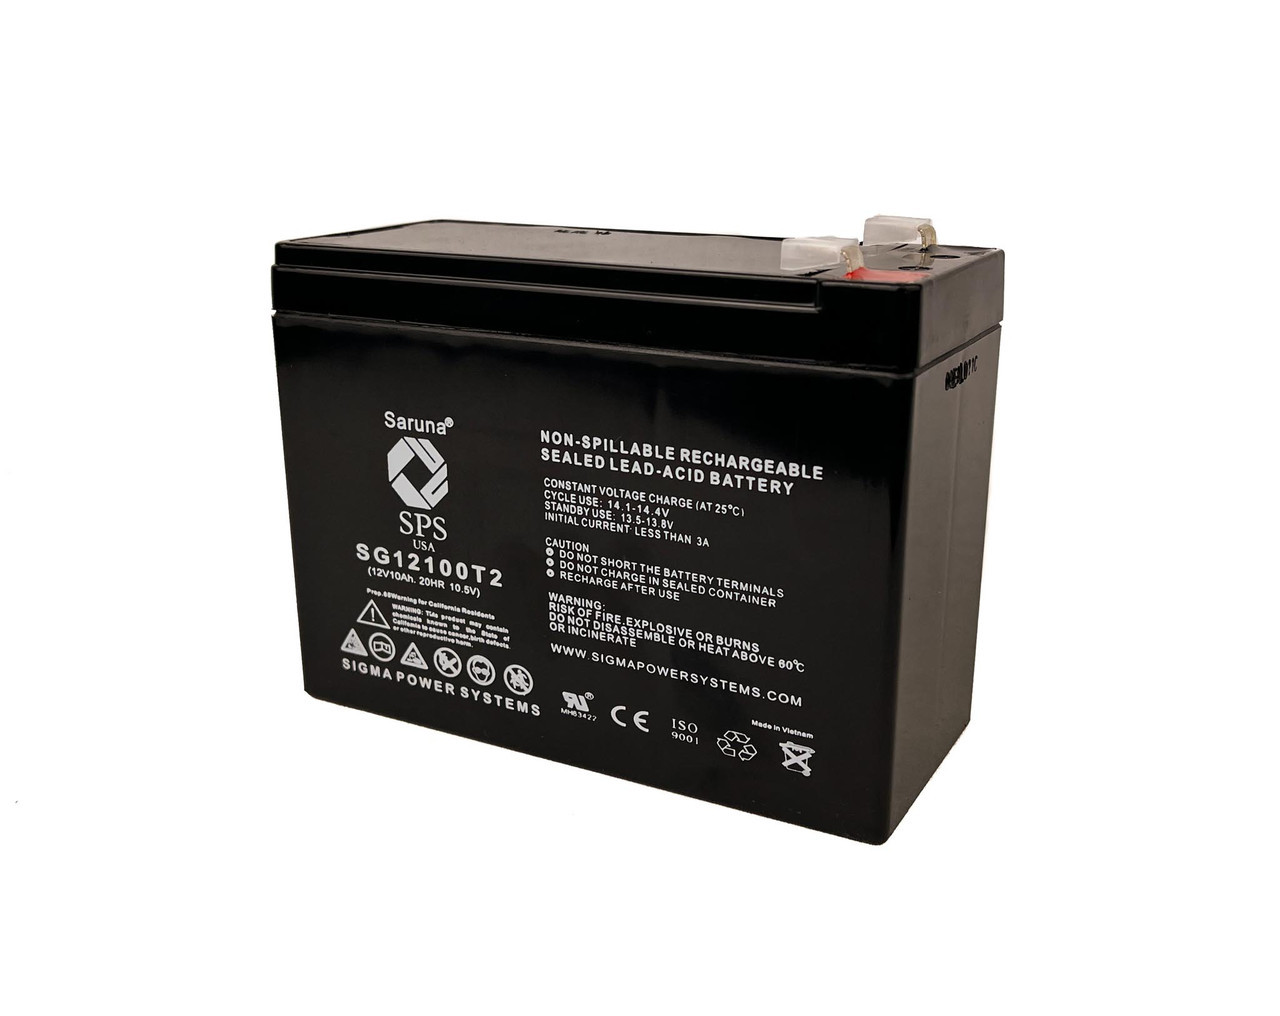 Raion Power 12V 10Ah Non-Spillable Replacement Rechargebale Battery for Minimoto Go Kart